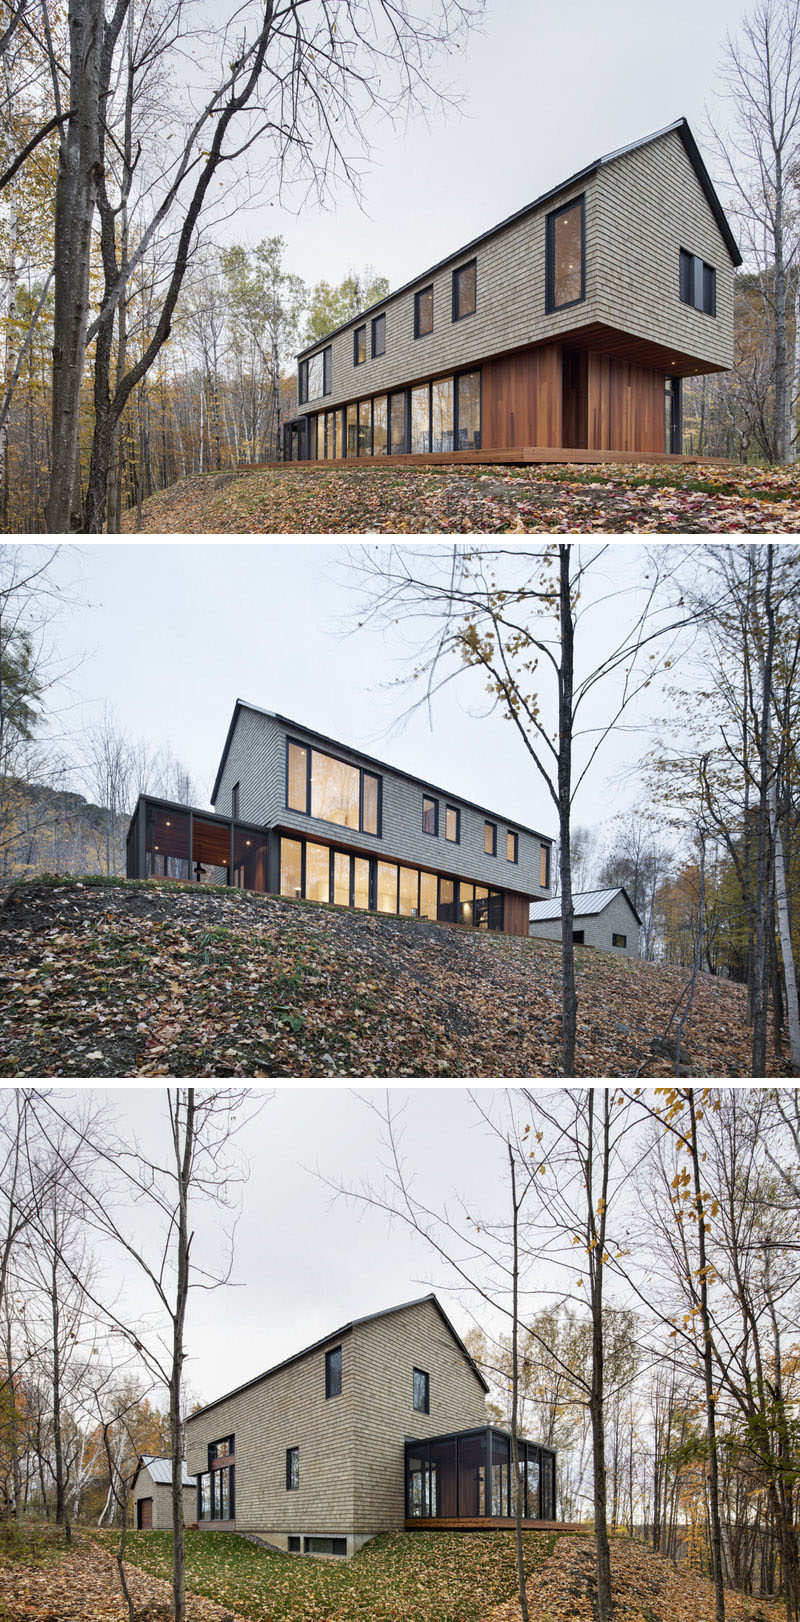 18 Modern House In The Forest // Wood shingles and wood paneling help this house fit right in with the forest surrounding it, while large windows provide views of the ever changing landscape. #ModernHouse #ModernArchitecture #HouseInForest #HouseDesign